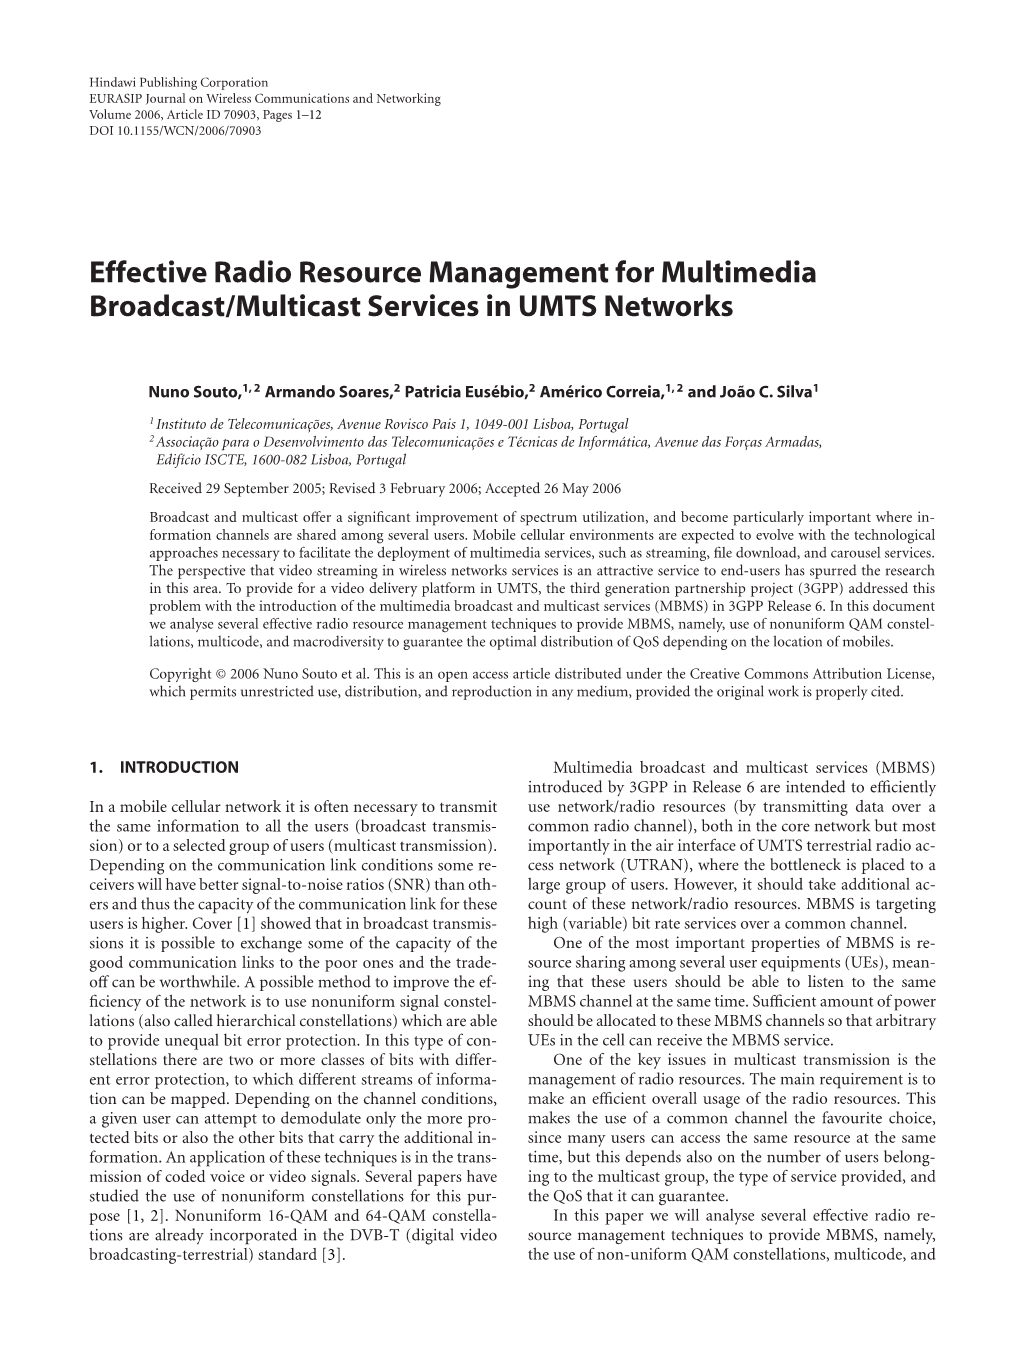 Effective Radio Resource Management for Multimedia Broadcast/Multicast Services in UMTS Networks